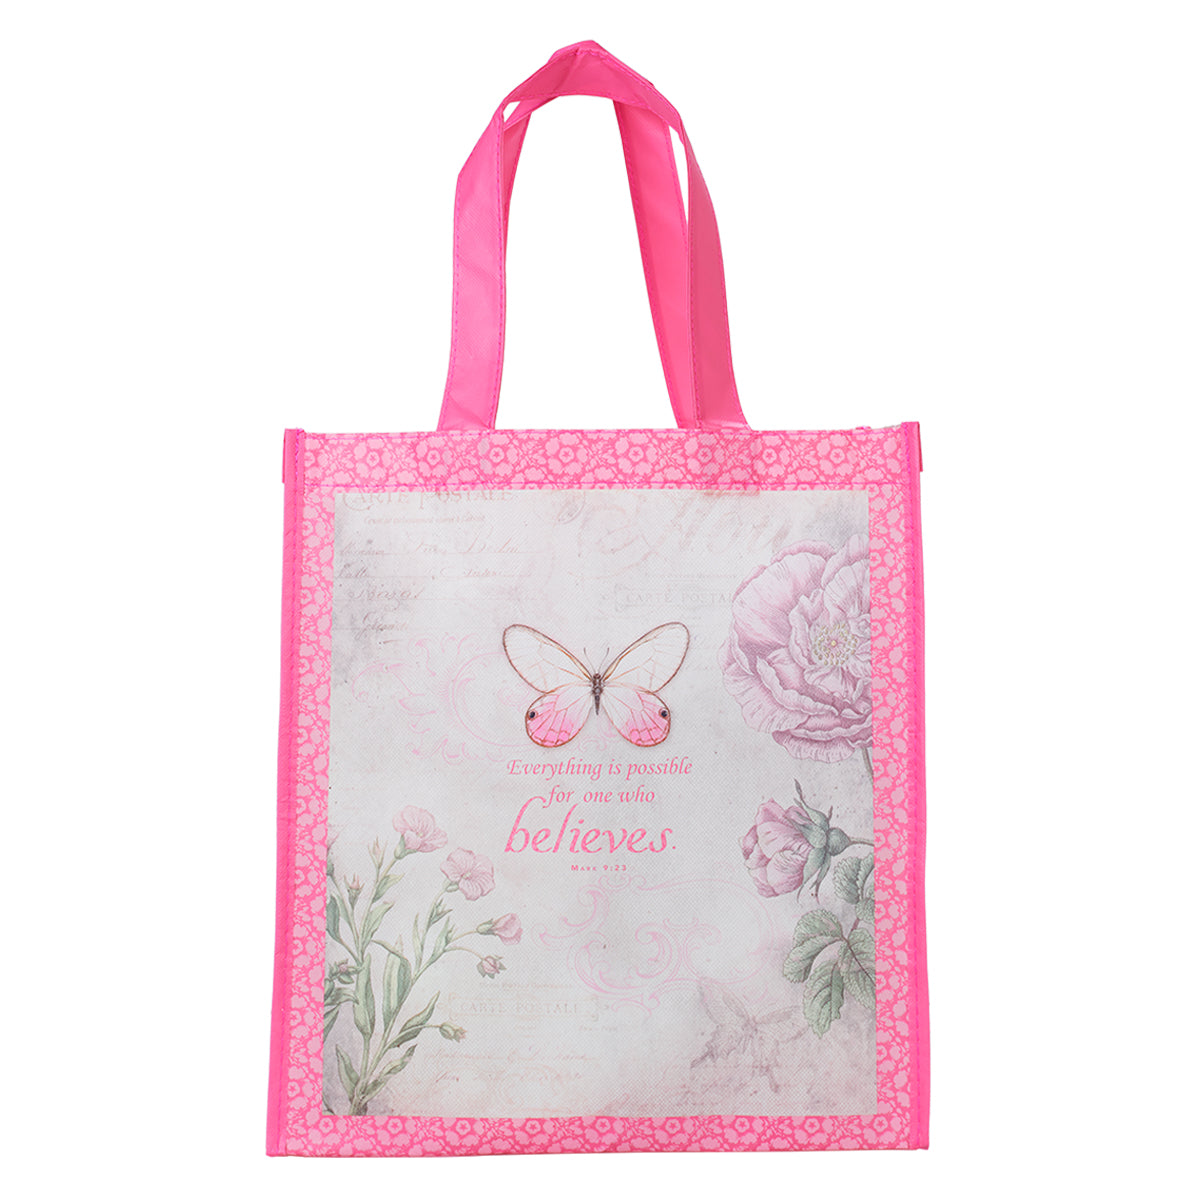 Believe Pink Butterfly Shopping Bag - The Christian Gift Company